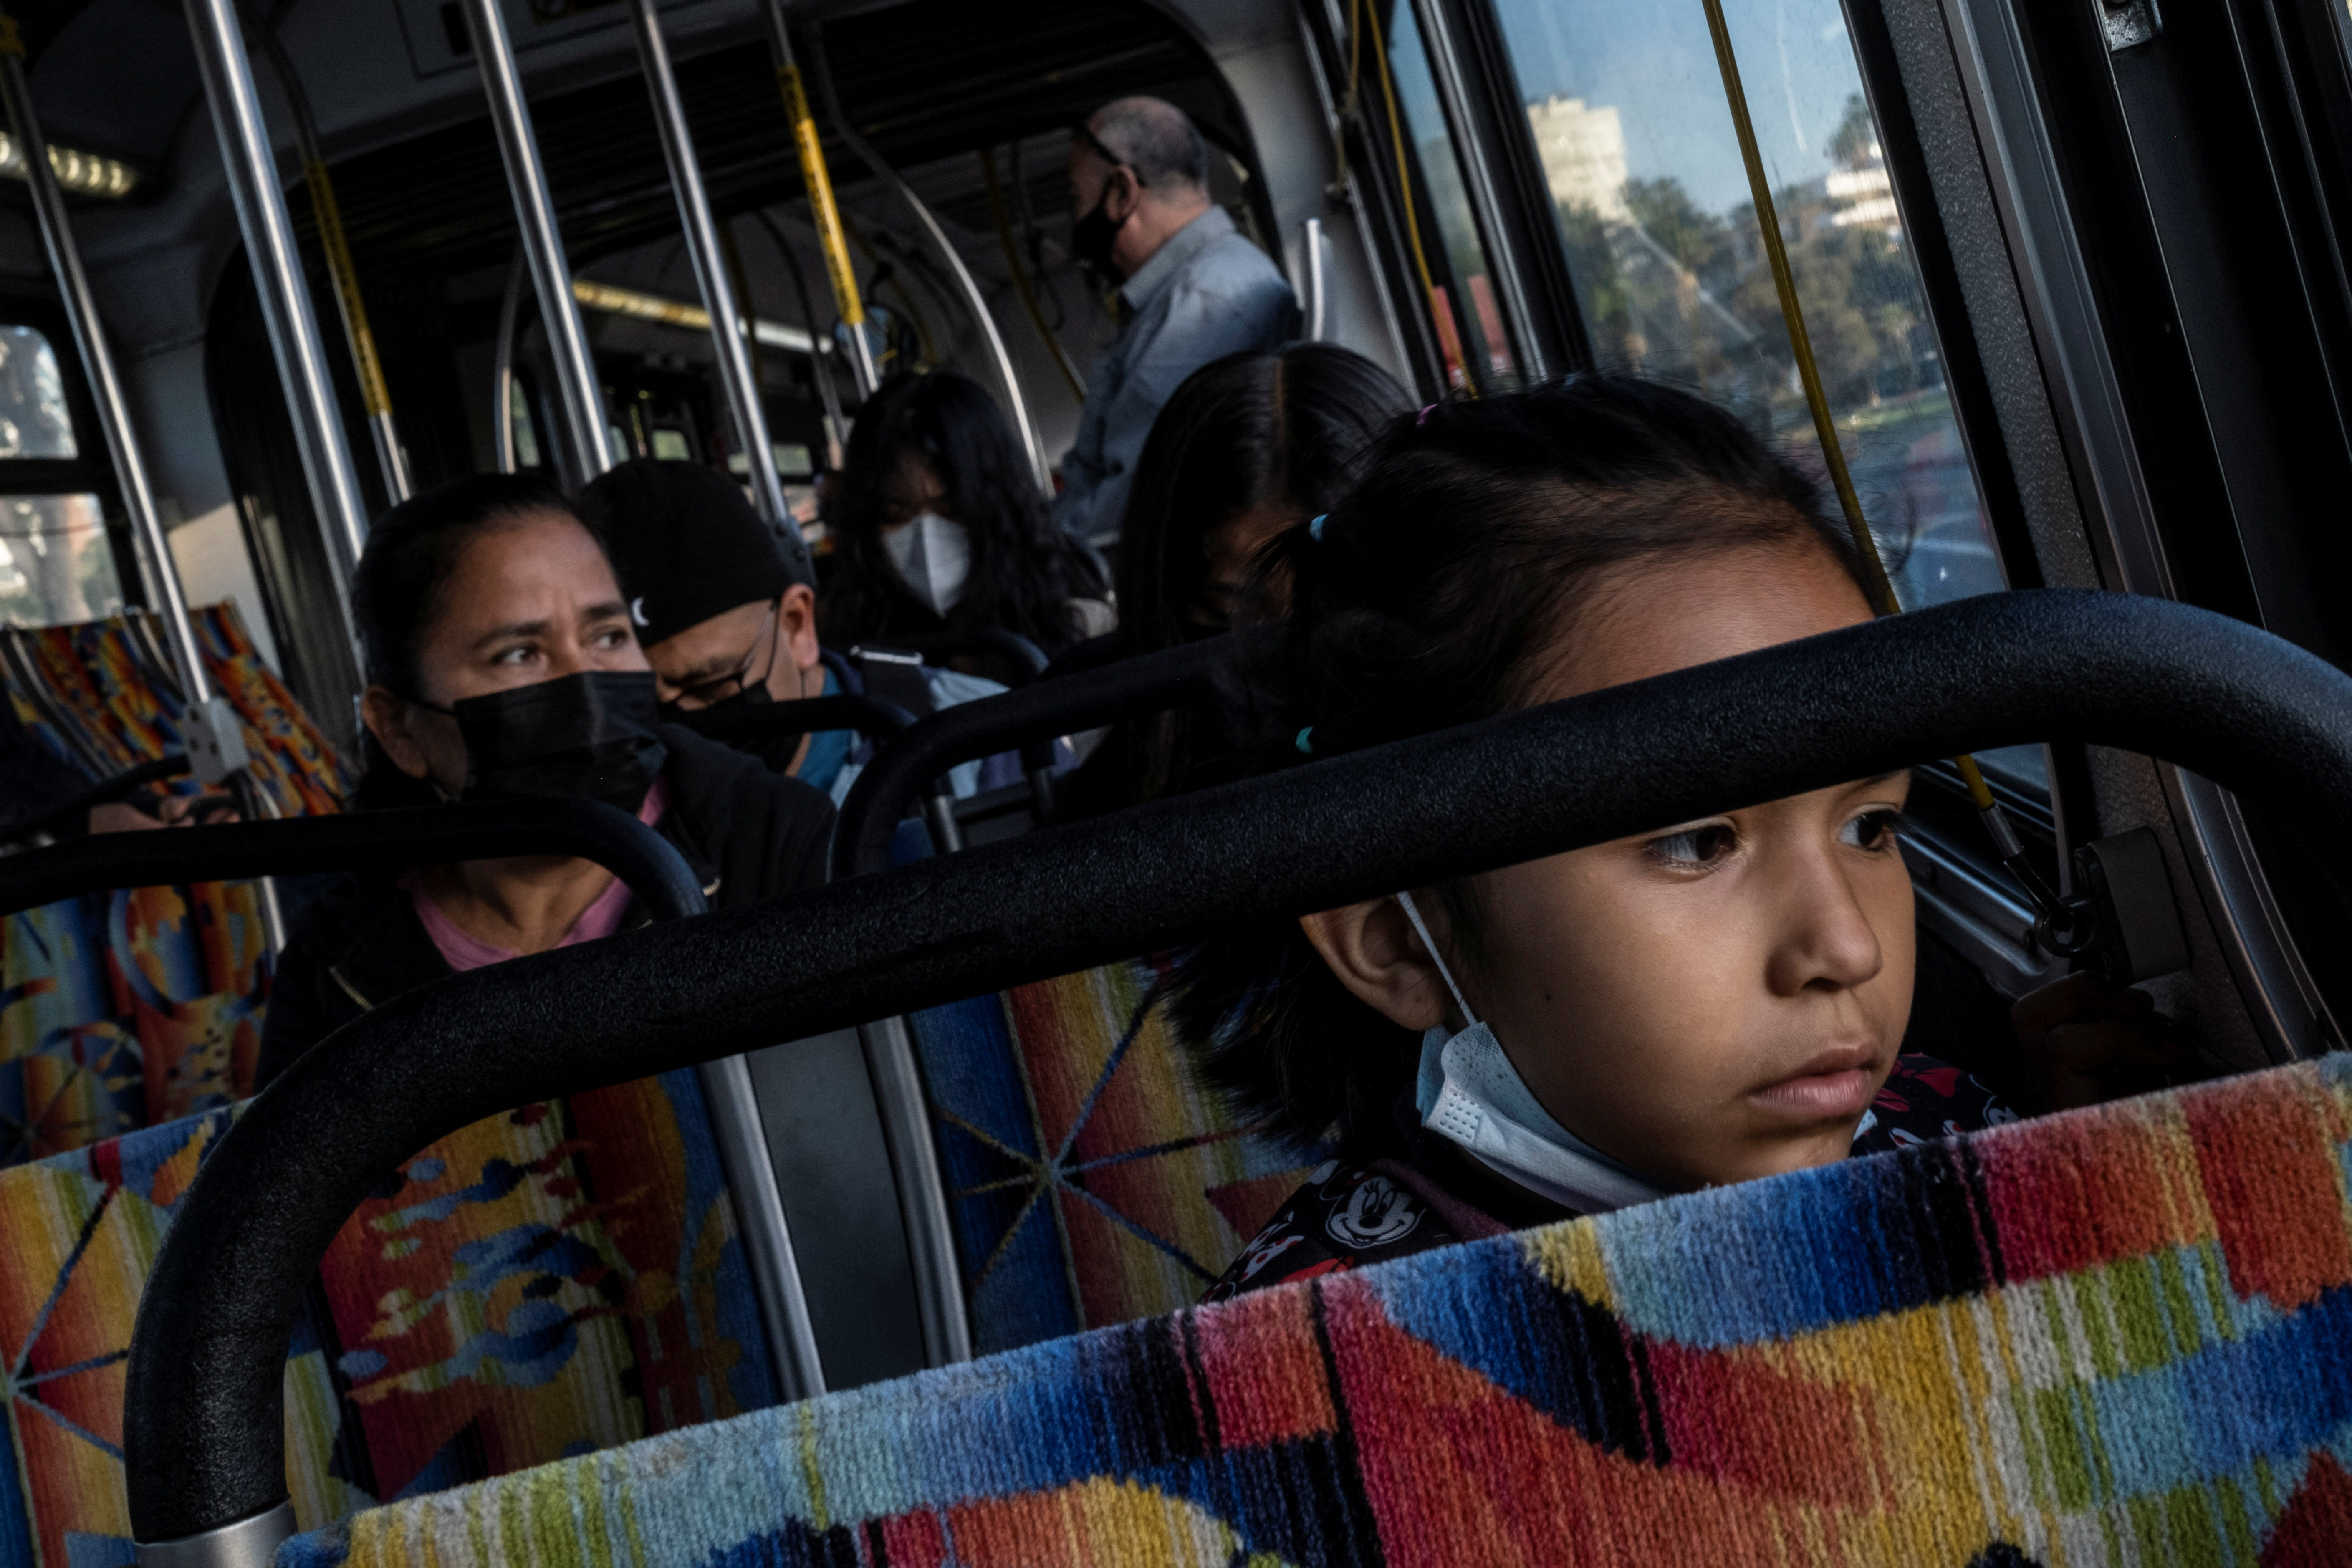 Maria Hernandez and her daughters travel on a bus after her reunification with them in Los Angeles